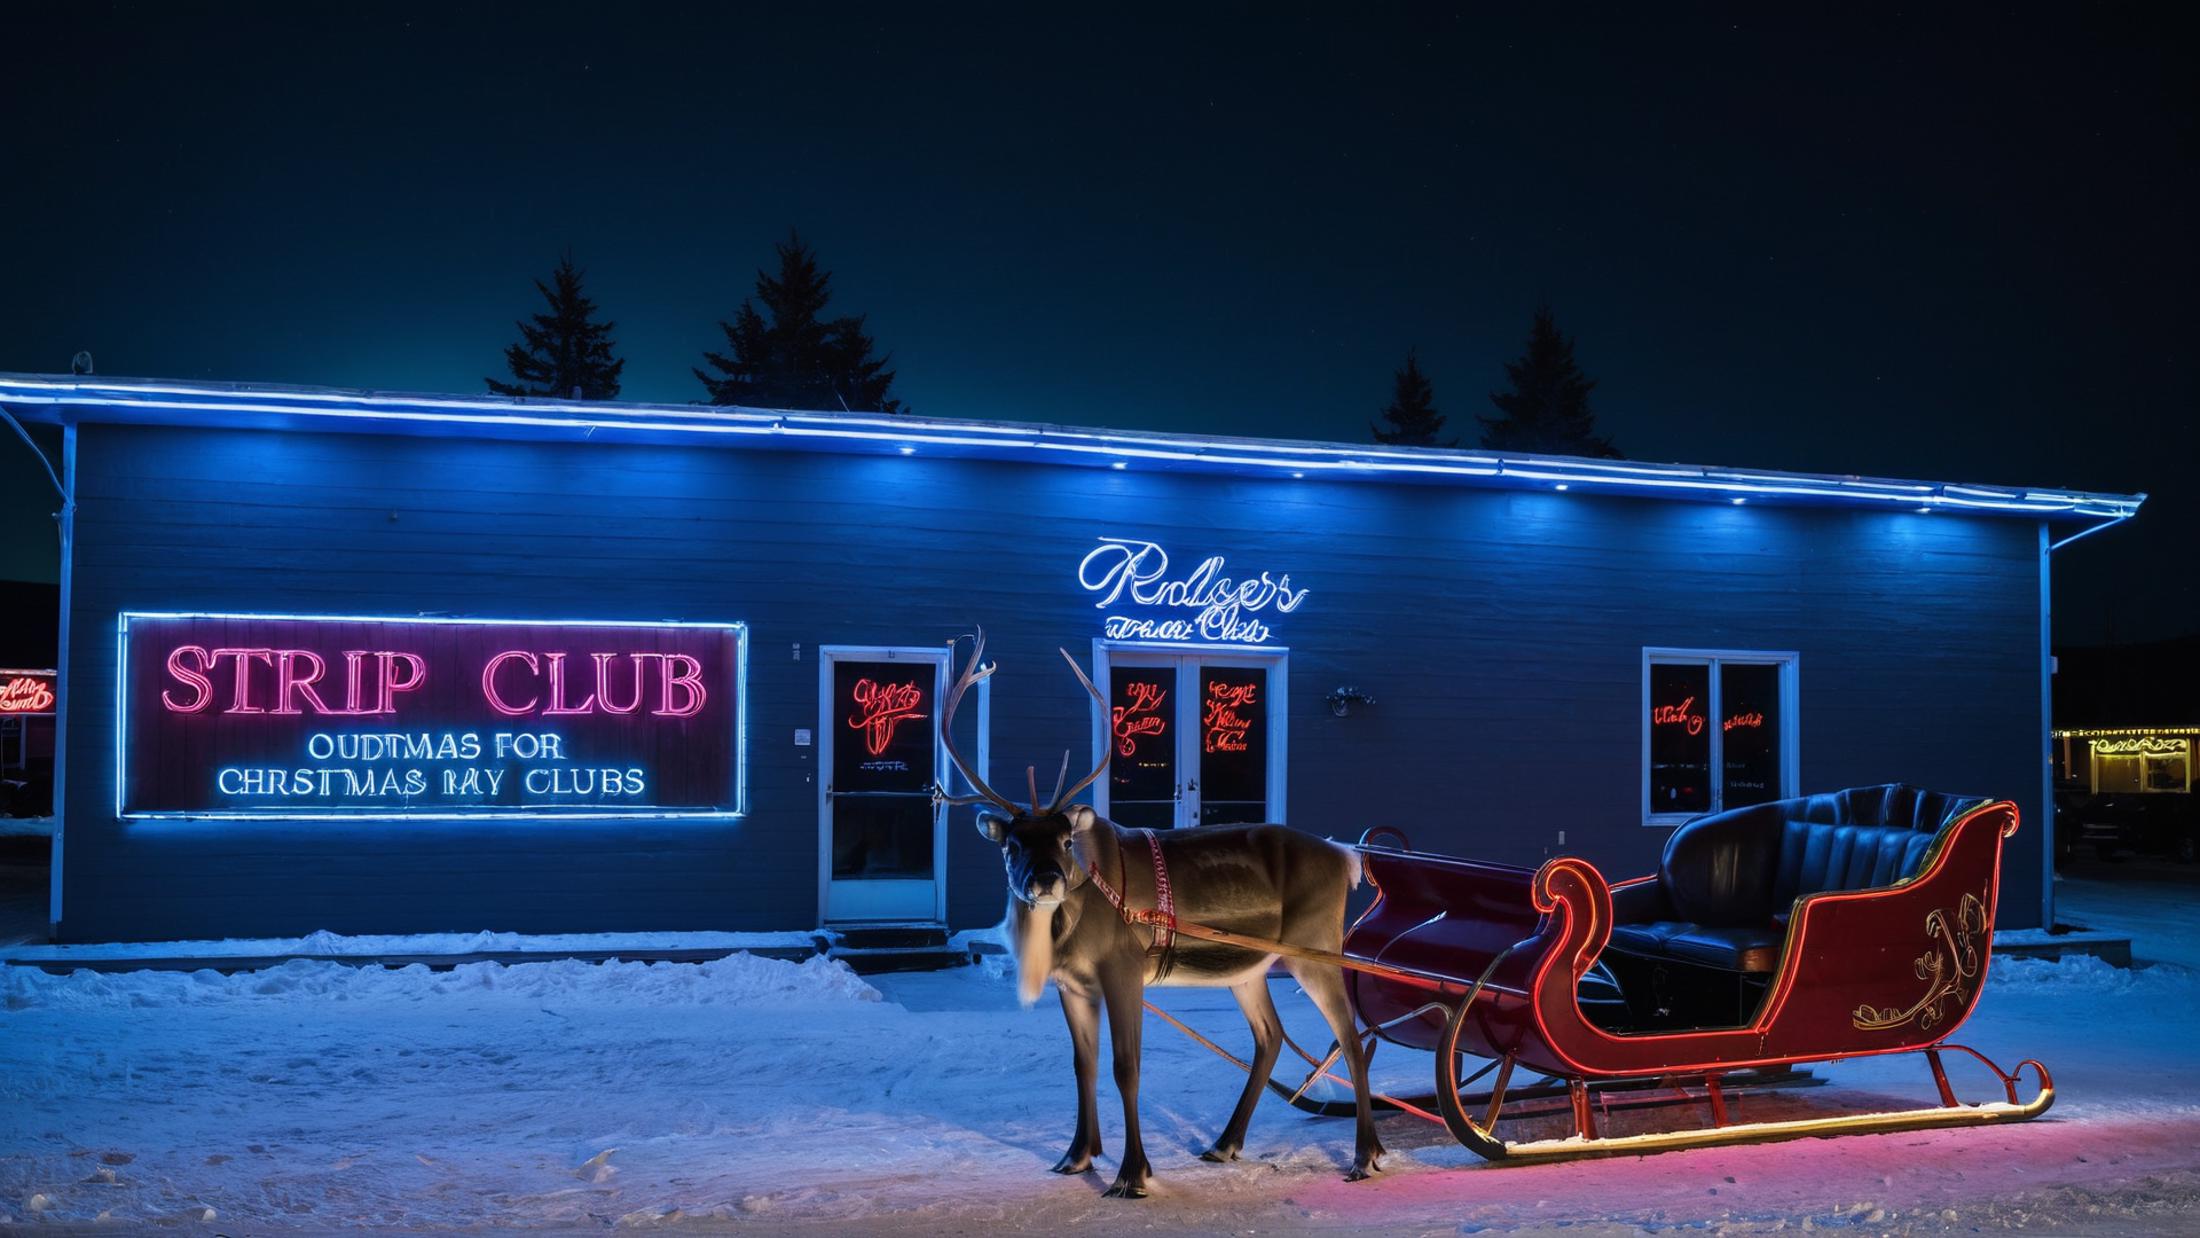 A reindeer pulling a sleigh in front of a Santa's Club building at night.